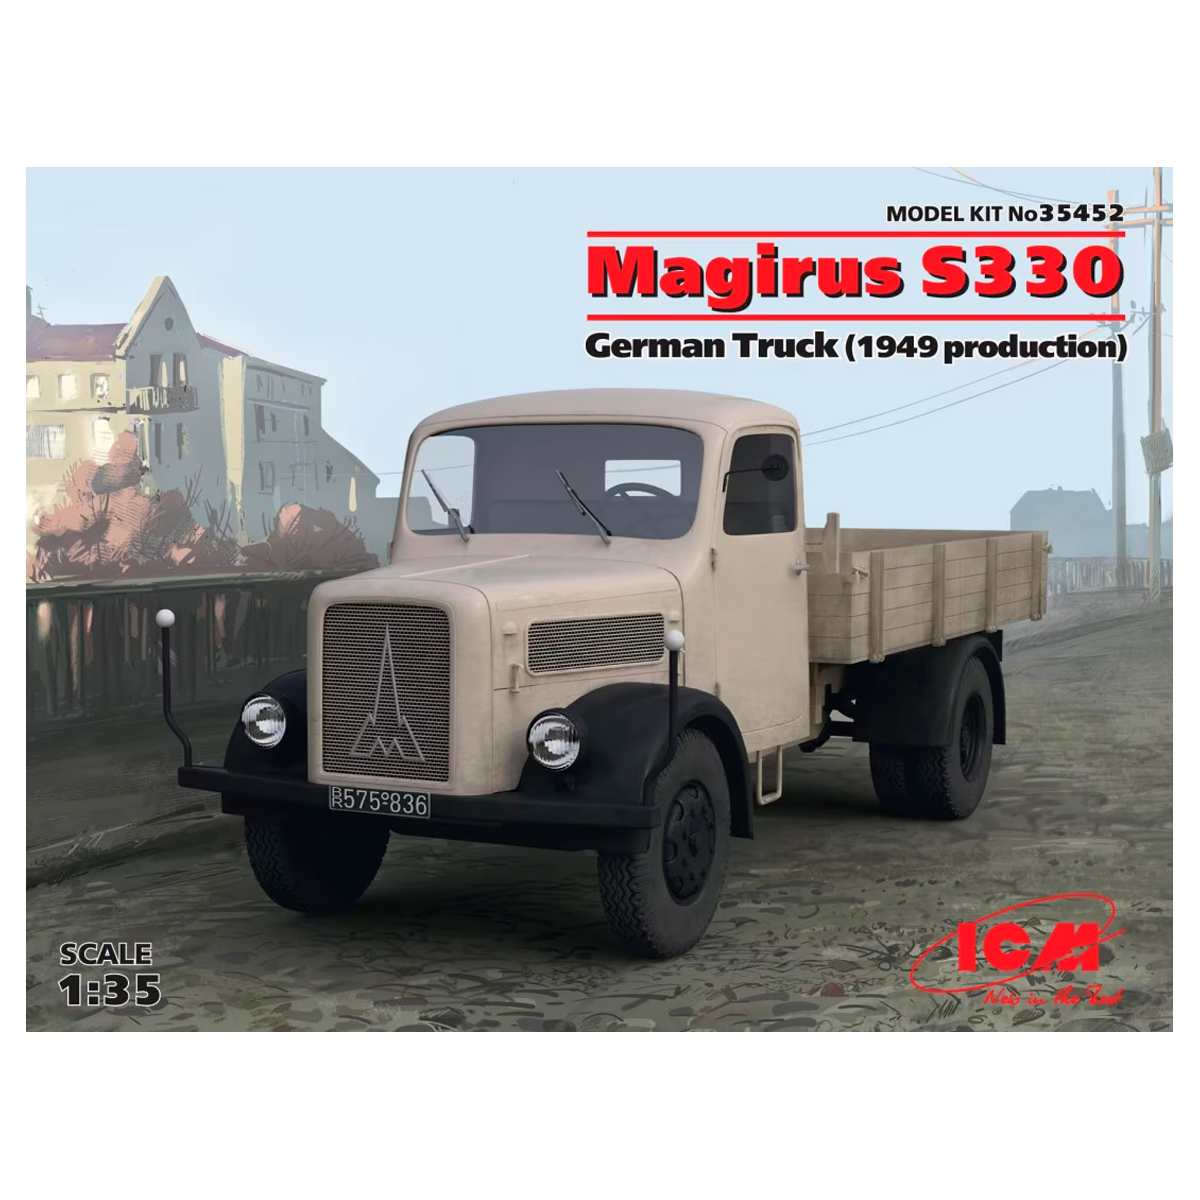 Magirus S330 German Truck (1949 production) (100% new molds) 1/35